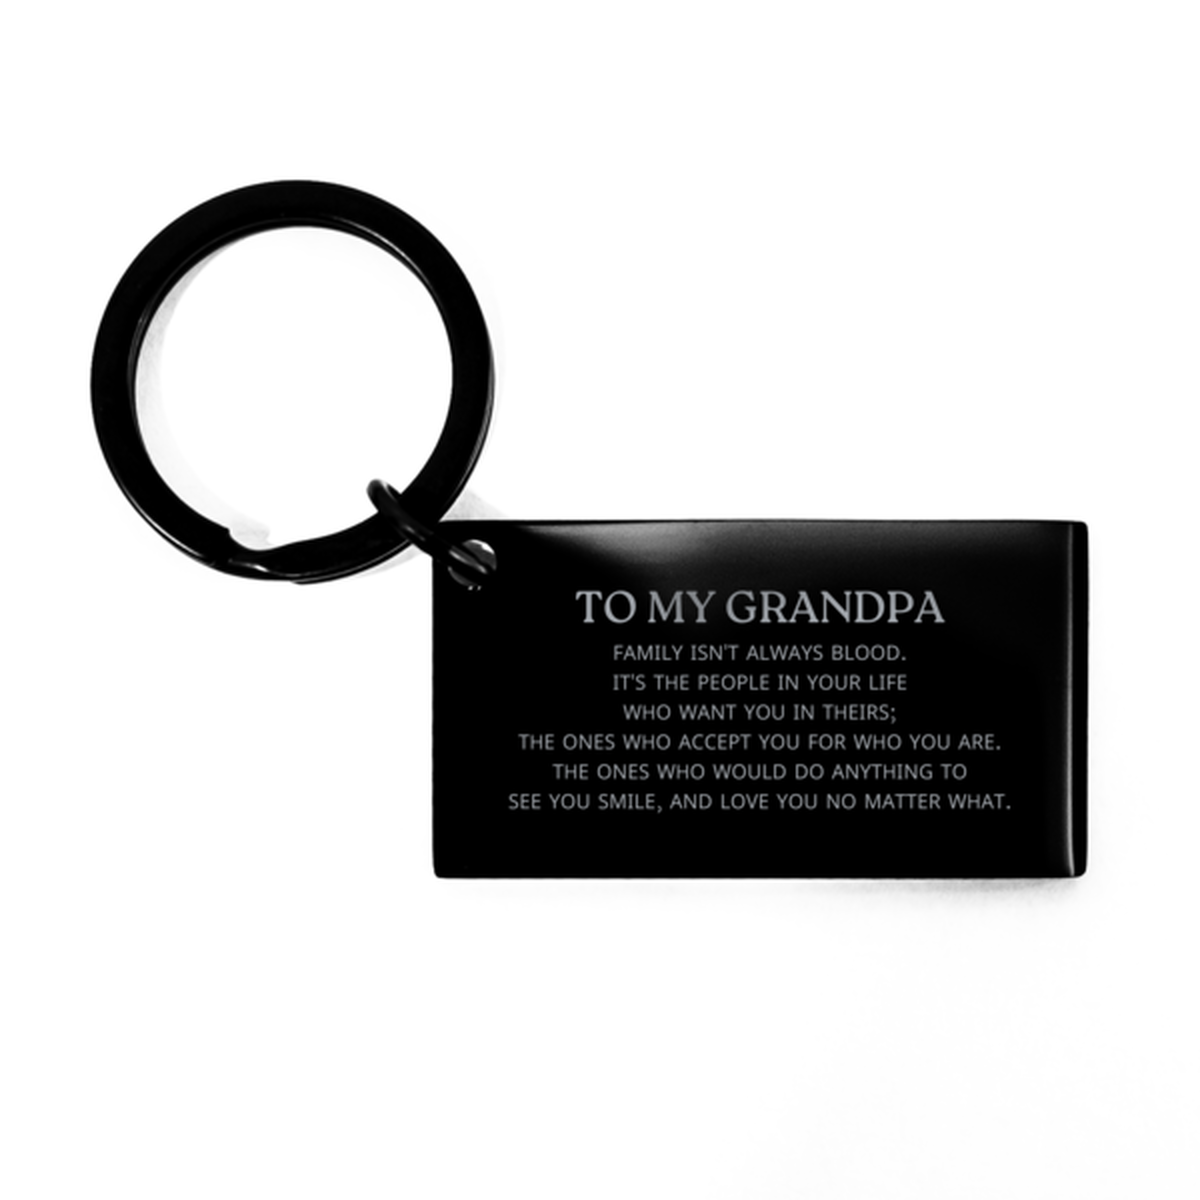 To My Grandpa Gifts, Family isn't always blood, Grandpa Keychain, Birthday Christmas Unique Present For Grandpa